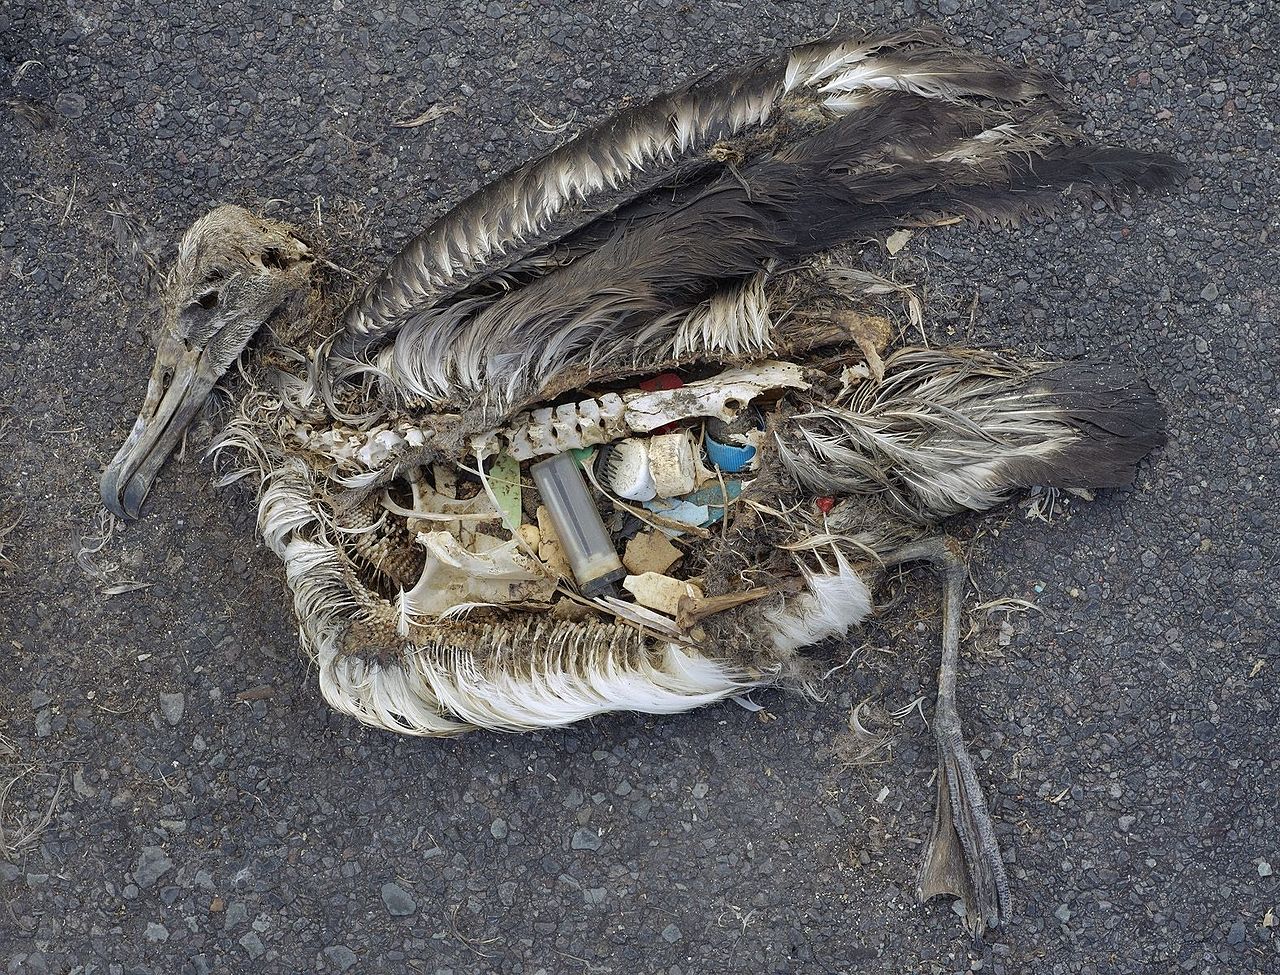 Image of Albatross chick who died from ingestion of plastics.